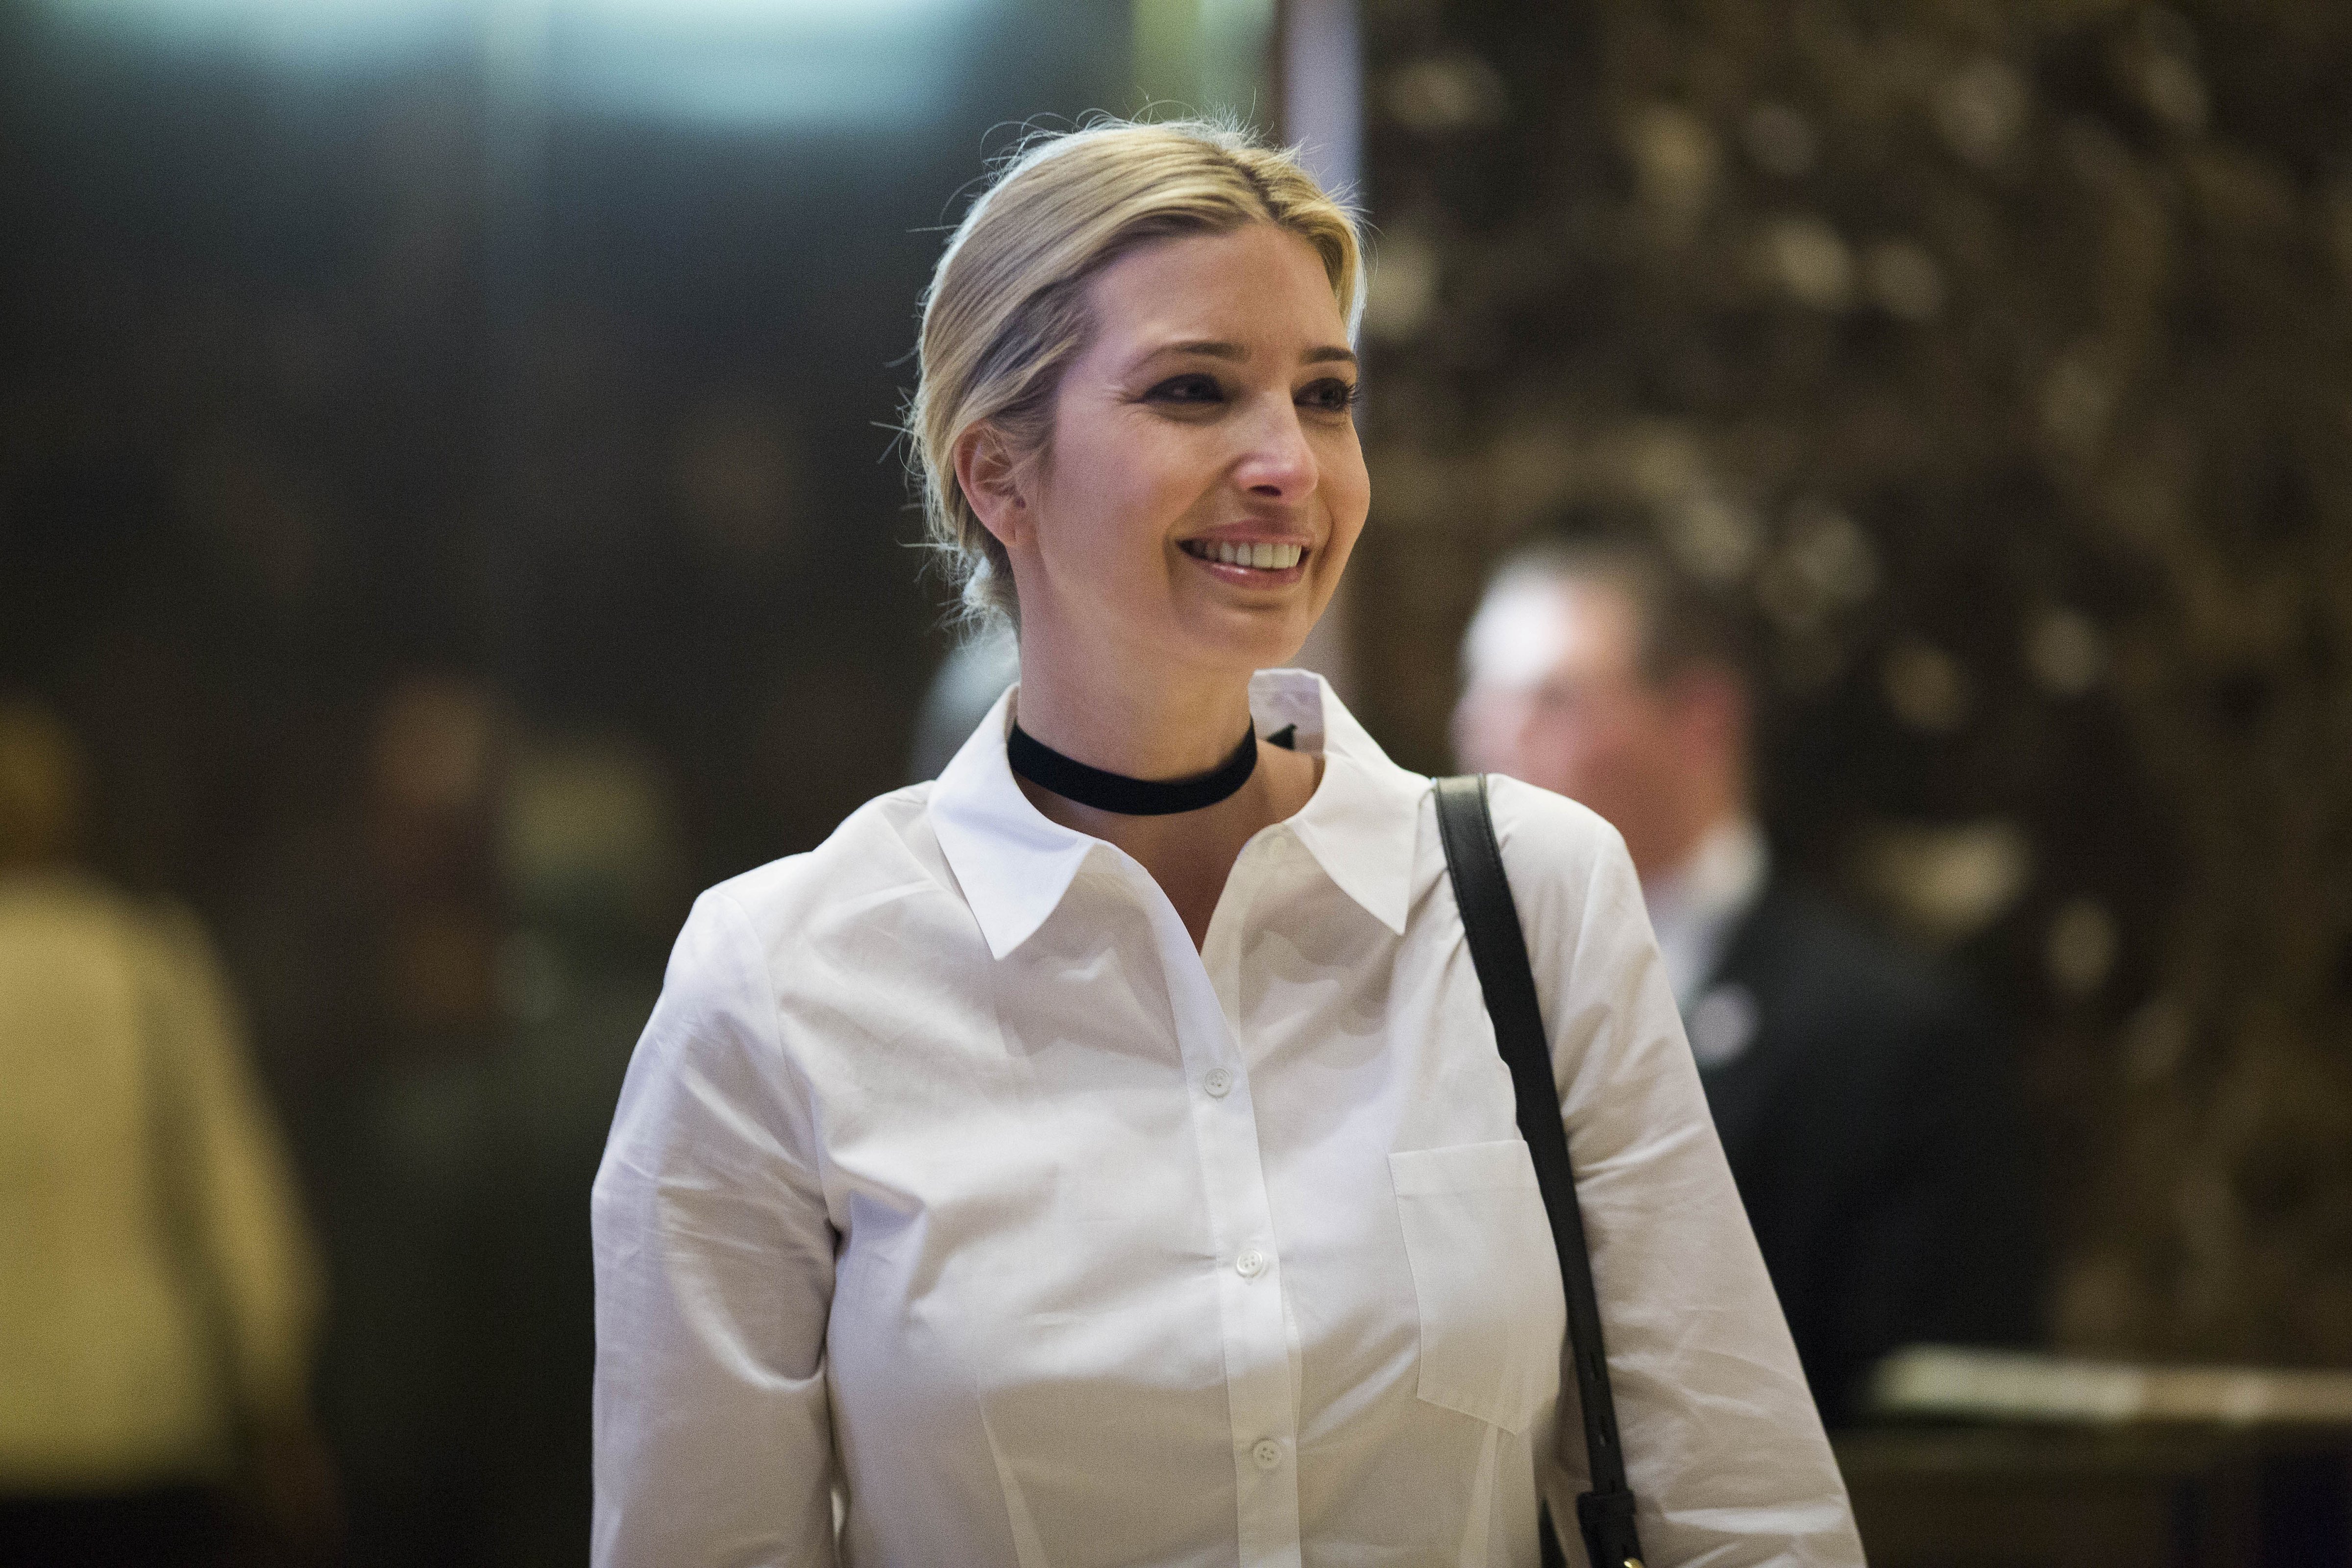 Ivanka Trump, daughter of U.S. President-elect Donald Trump, arrives at Trump Tower in New York on Nov. 18, 2016. (Bloomberg via Getty Images)